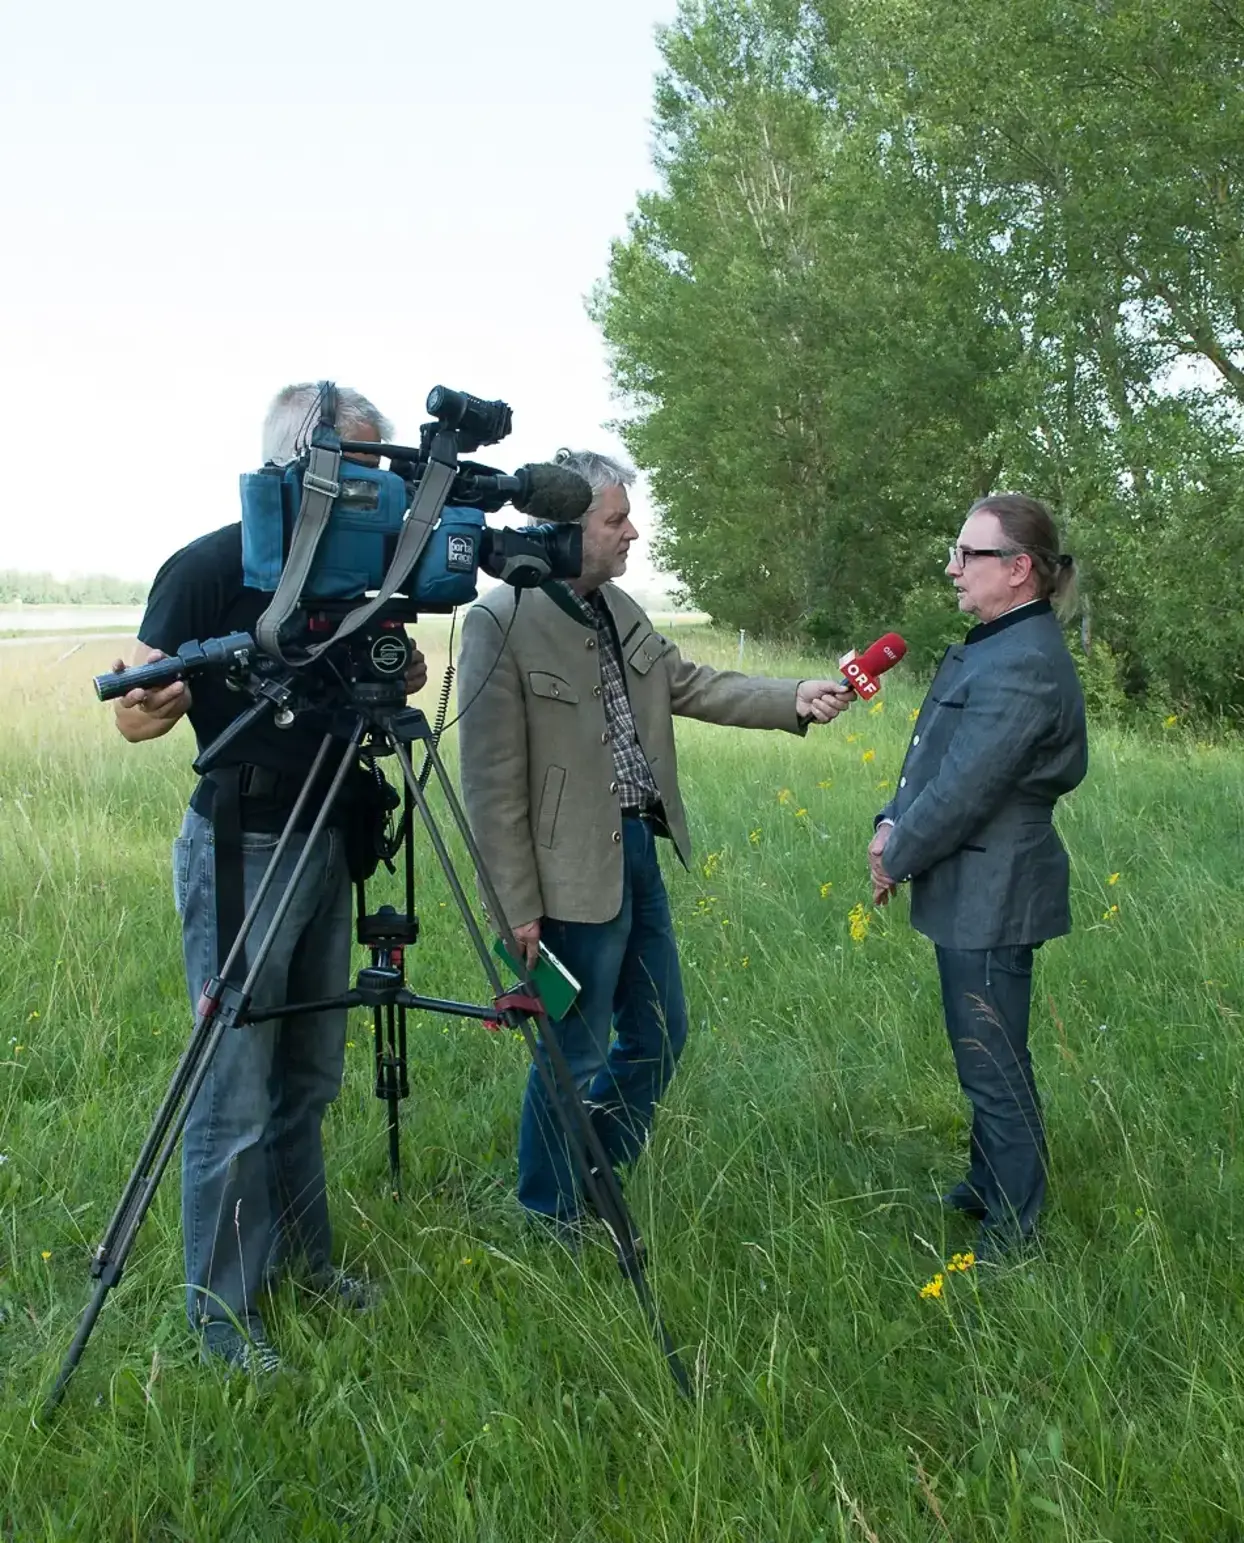 Interview LIFE+ Traisen with project manager Helmut Wimmer, who is interviewed by ORF. He speaks into a microphone and the camera is directed at him. The interview takes place directly on the Traisen.